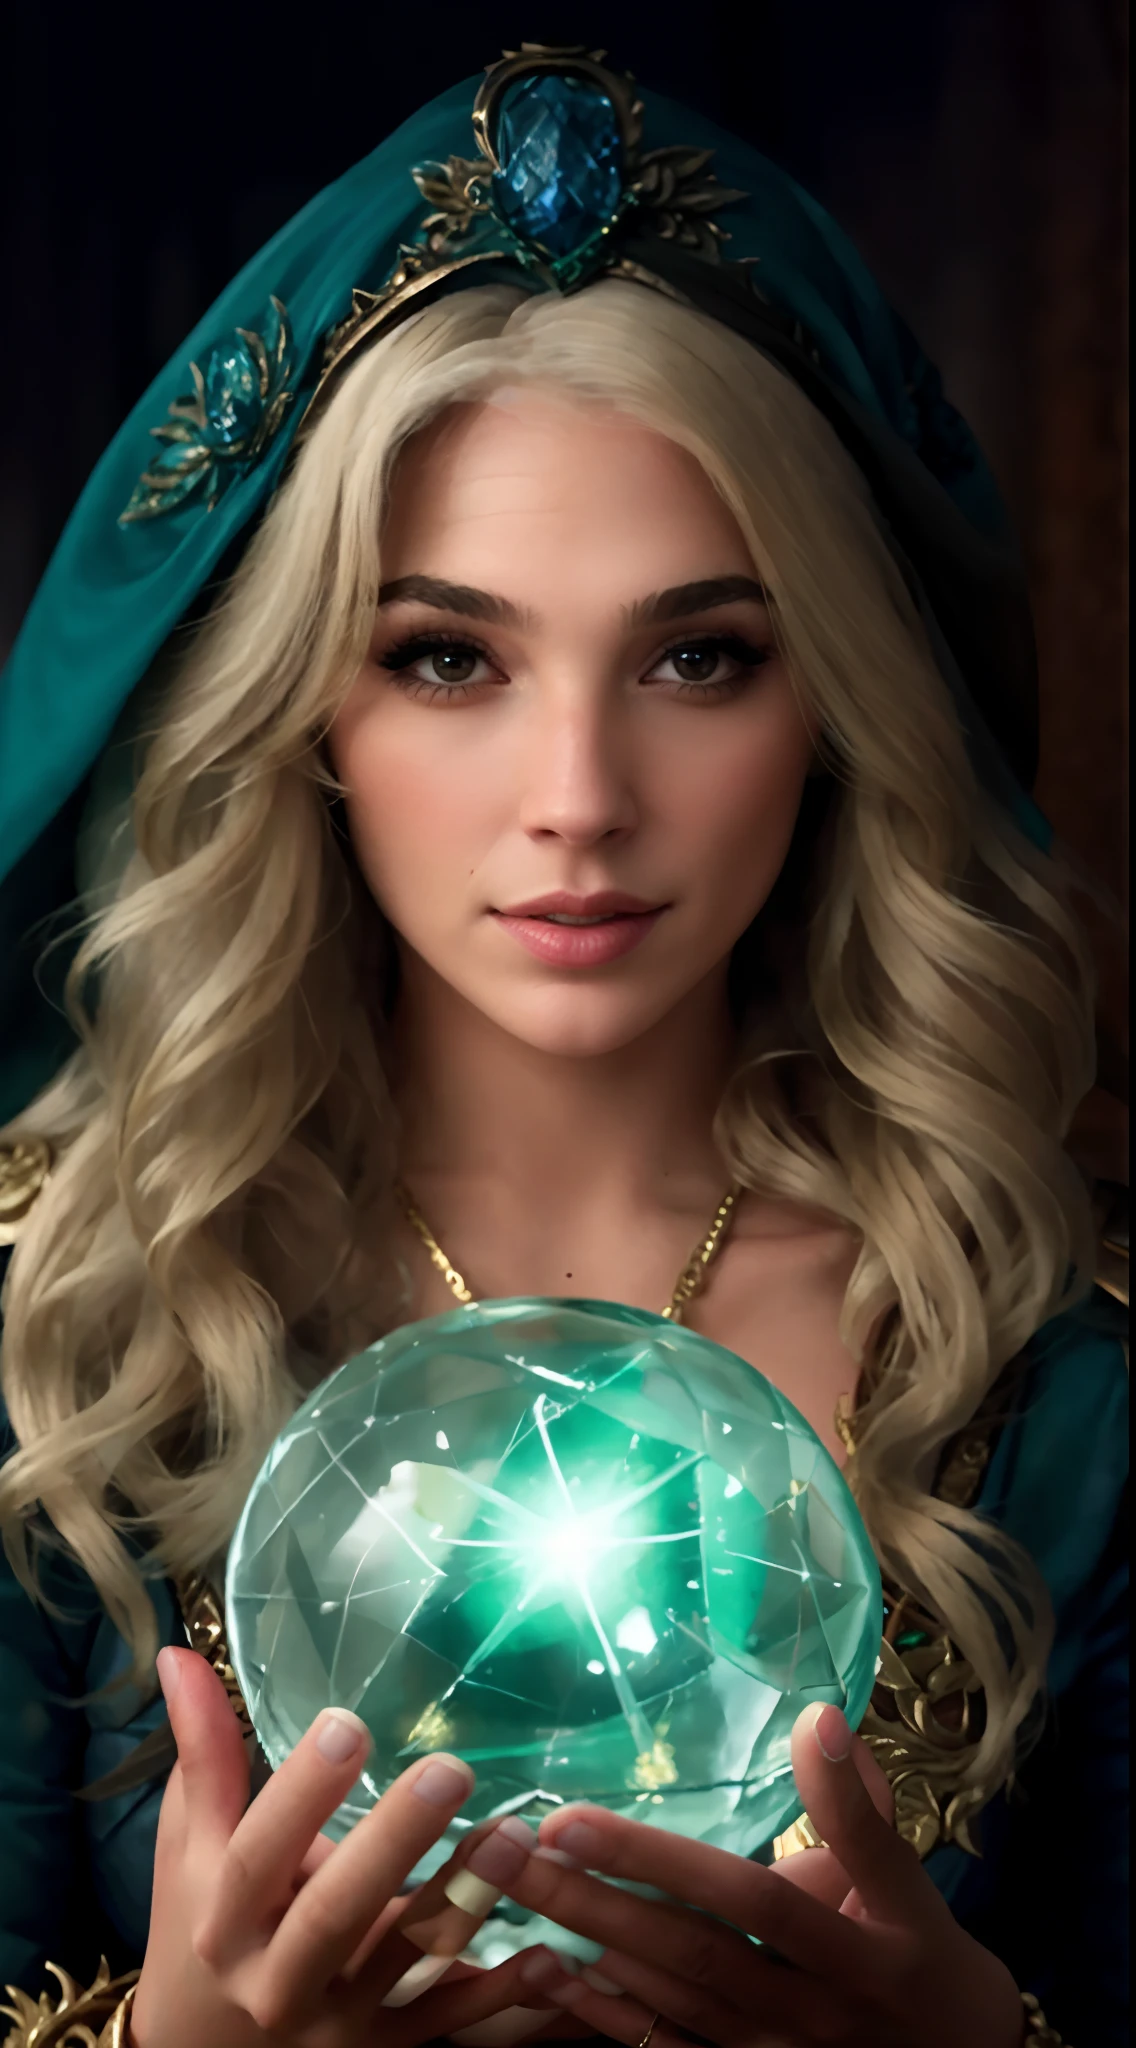 a woman in a red robe holding a crystal ball, mulher enchantress, supervillain sorceress witch, enchantress, Cory Chase como um atlante, Female mage conjuring a spell, uma bela enchantress, spell casting wizard, a woman holding an orb, Retrato de uma enchantress, enchantress bonita, a beautiful female wizard